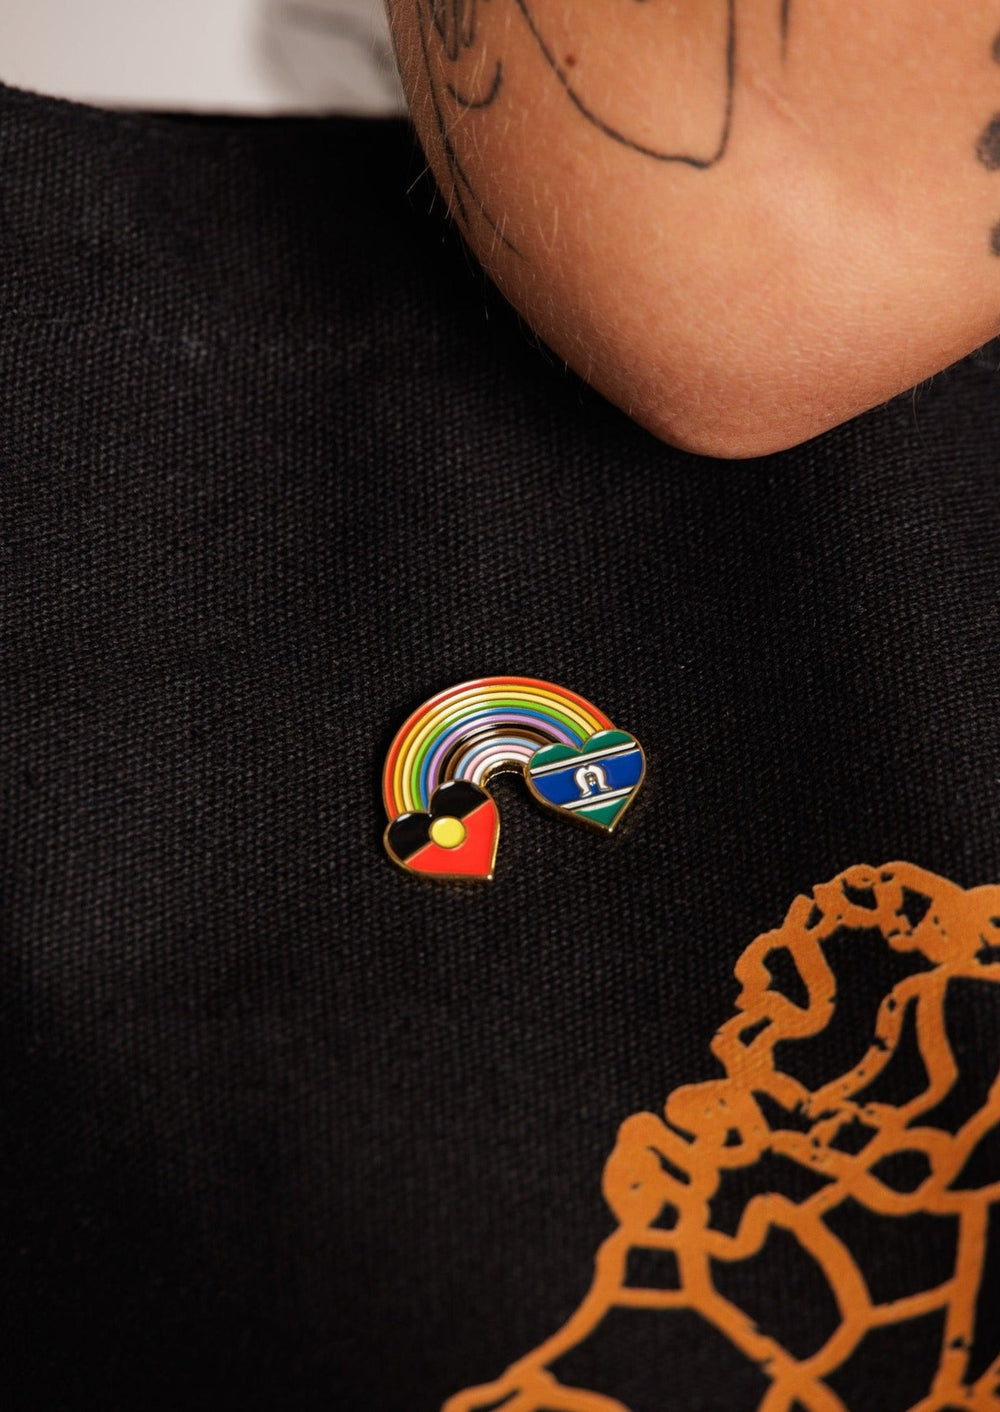 Clothing The Gaps. Rainbow Mob pin. Pin with Aboriginal flag in love heart shape at the start of a rainbow and at the end of the rainbow the Torres Strait Islander flag in love heart shape. The rainbow includes the colours from the progress pride flag. Show your pride or support for First Nations LGBTQIAS&B+ Community.